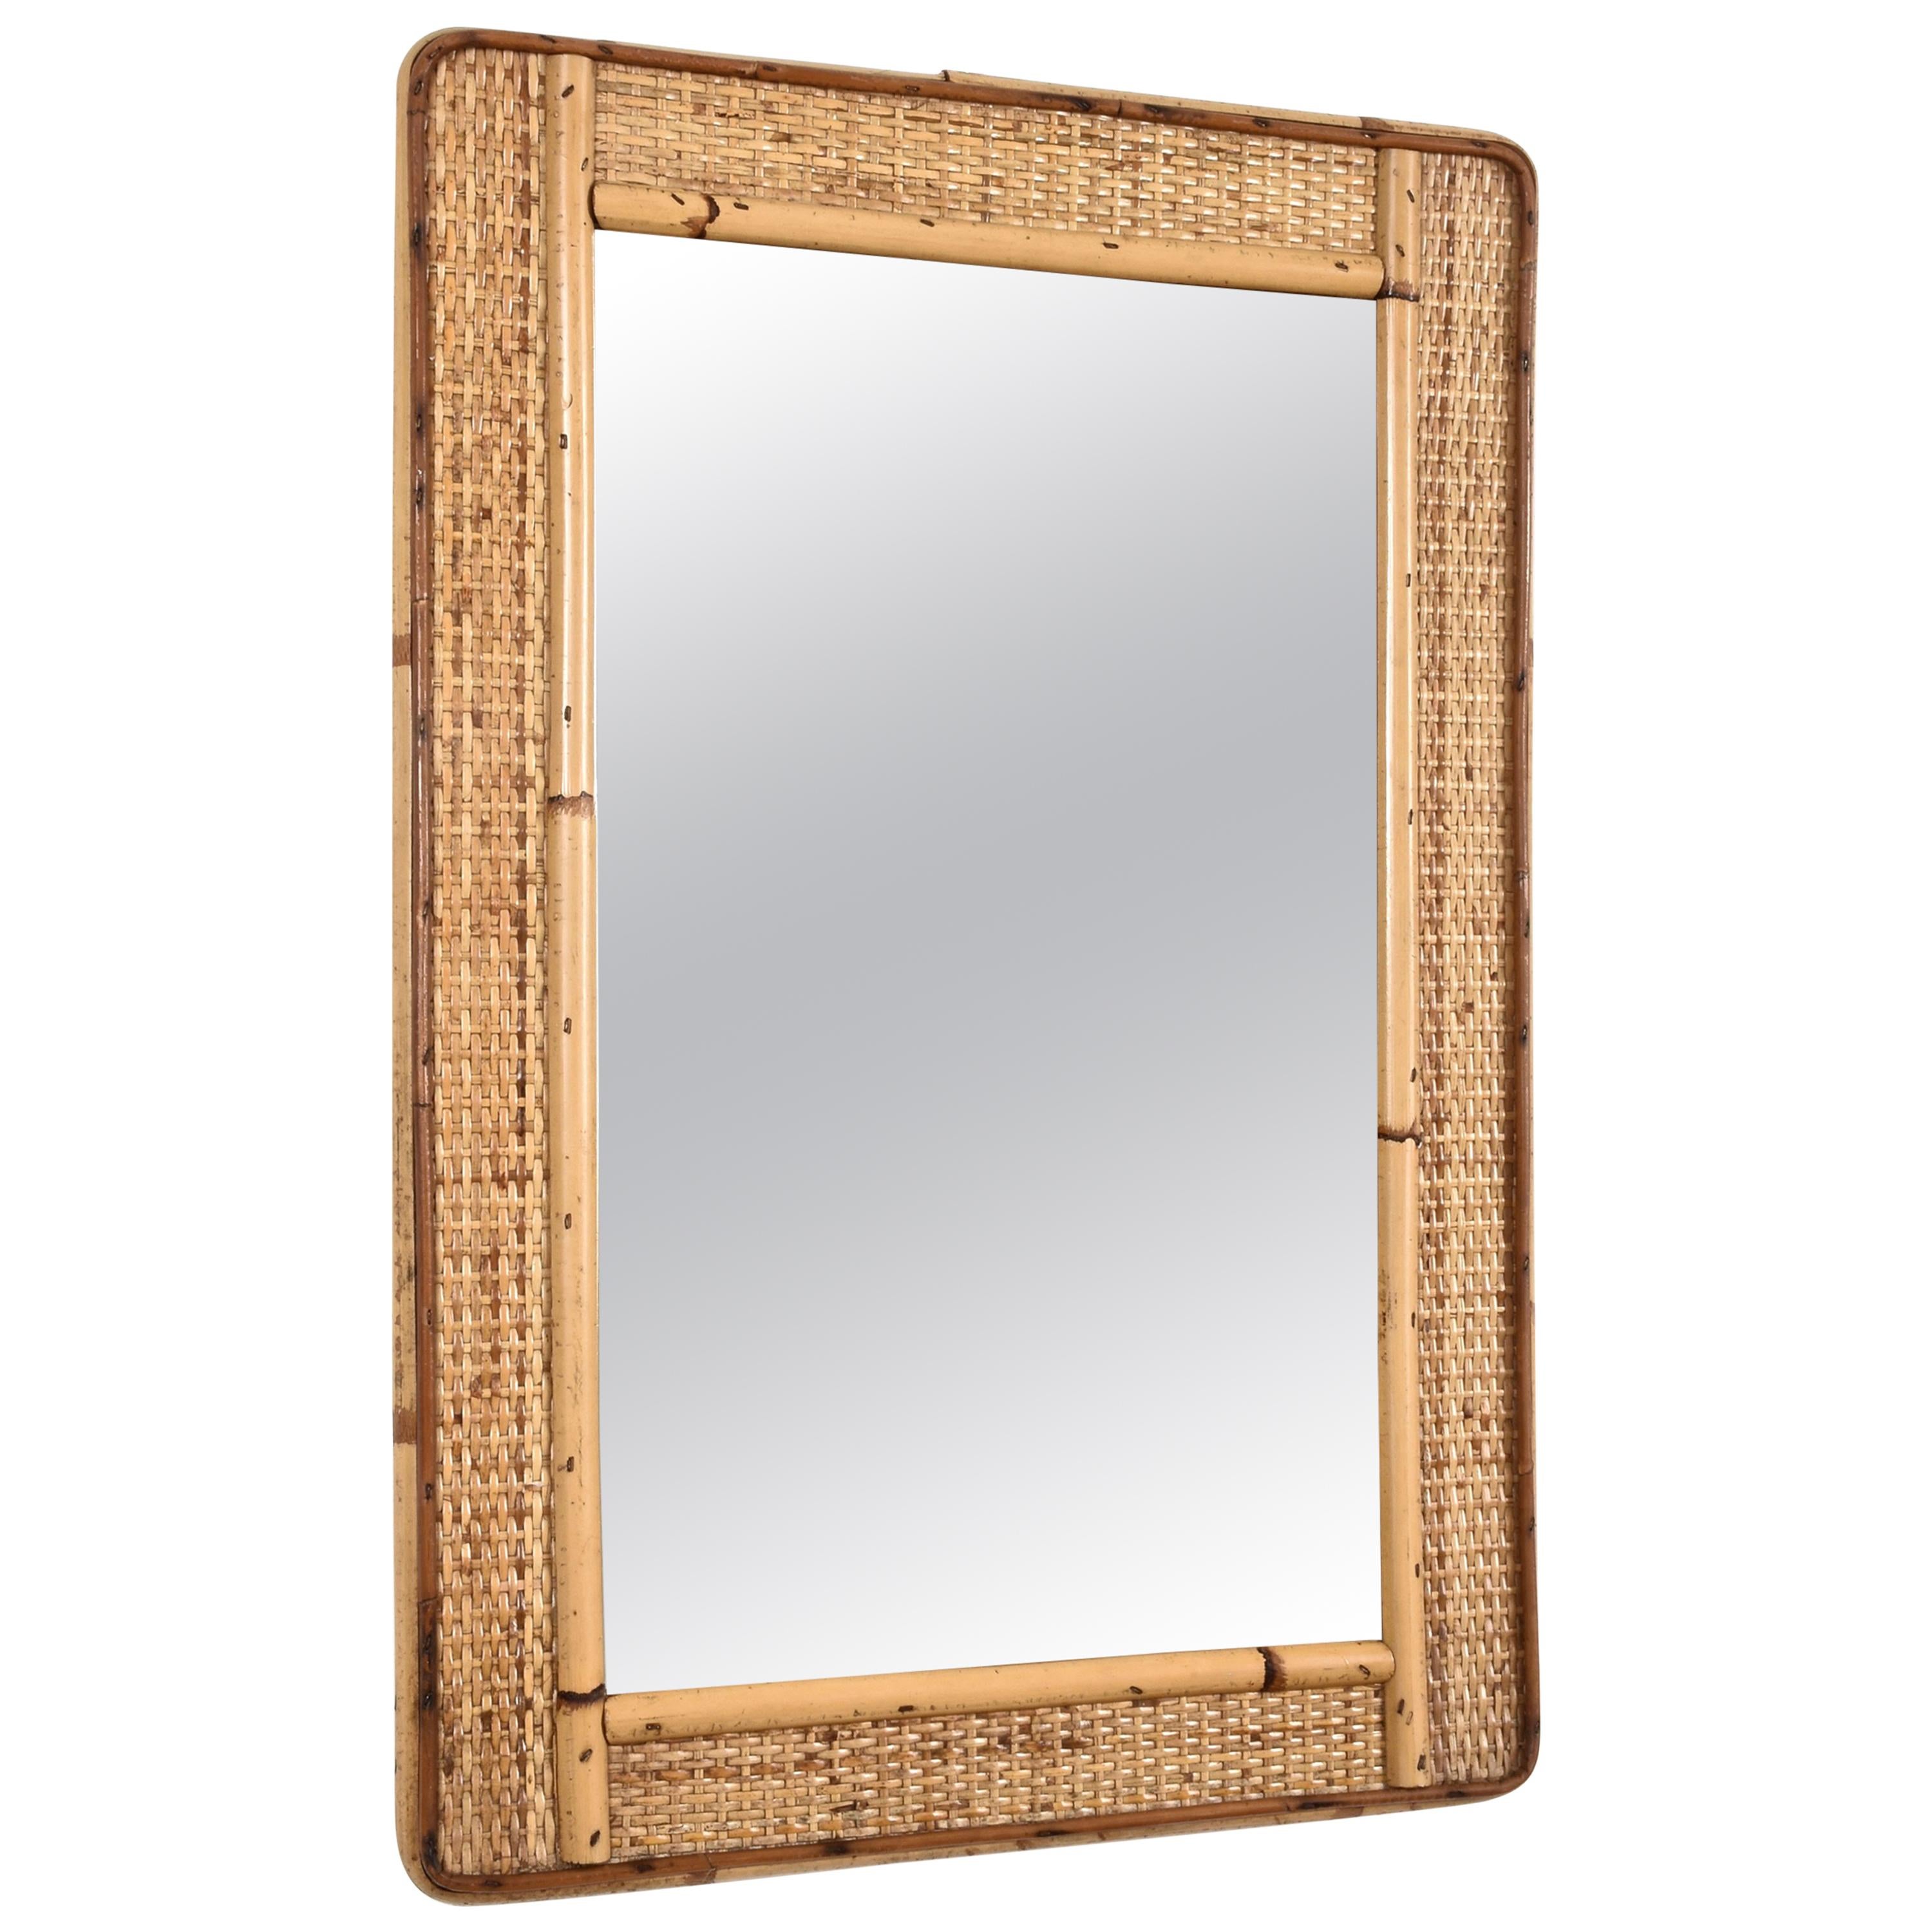 Rectangular Mirror with Bamboo Wicker Woven Frame from the 1970s, Italy